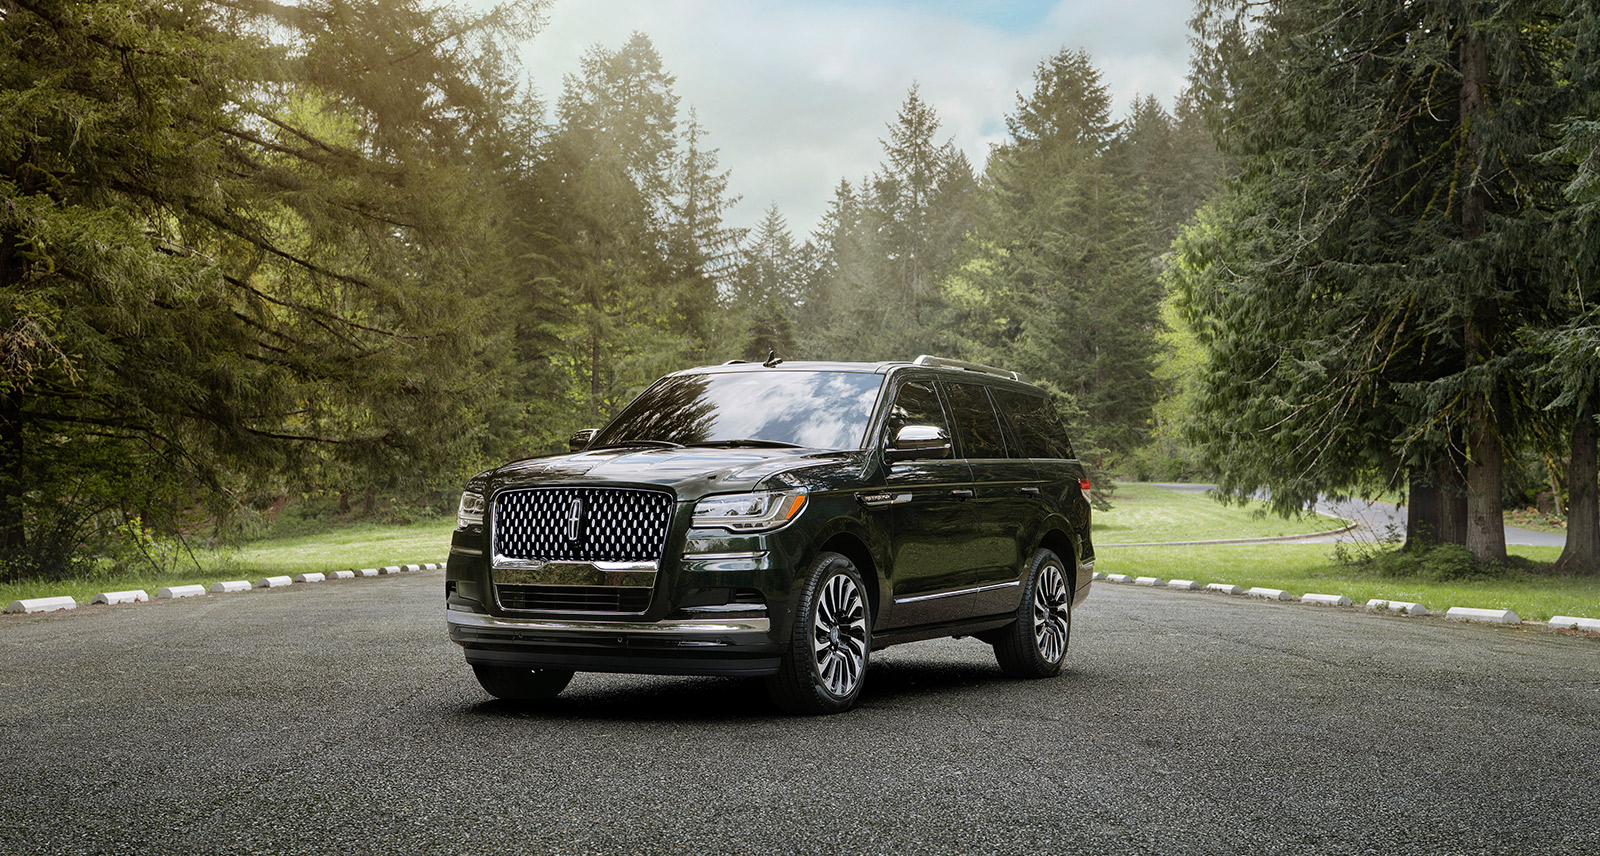 The Luxurious New Lincoln Navigator is a Four-Wheeled Oasis